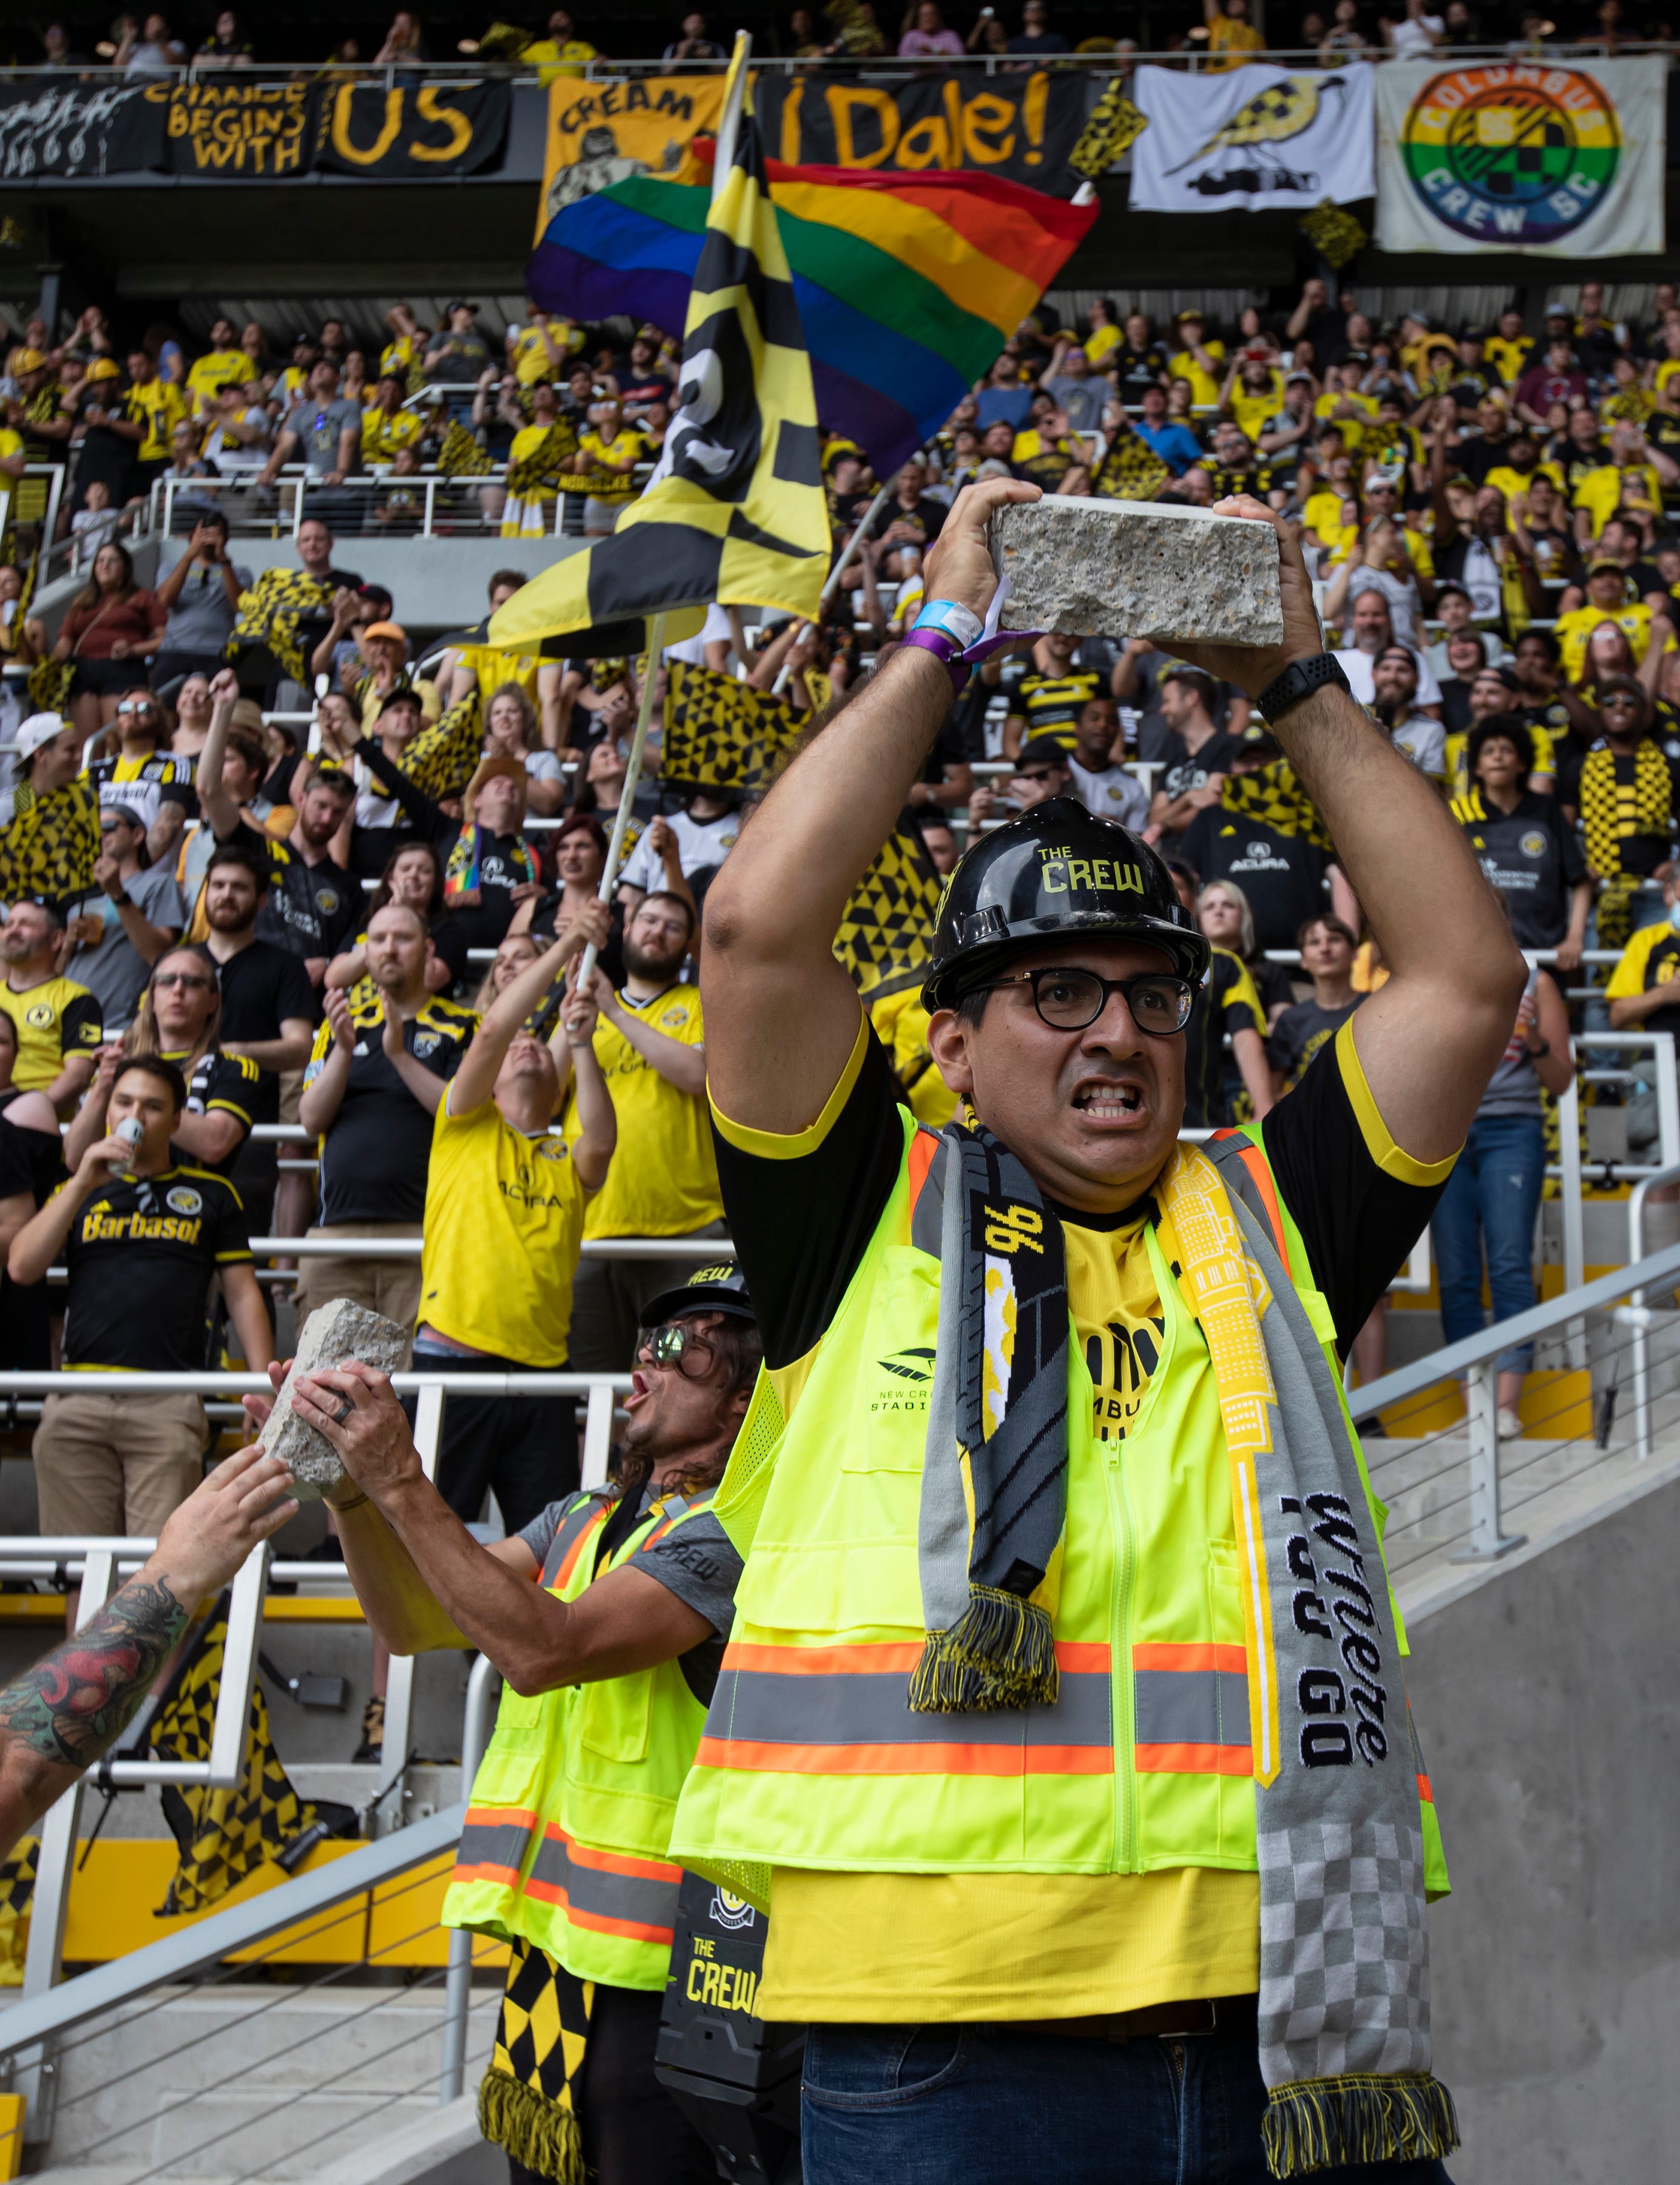 Jairo Manuel Alza hoists a piece of concrete over his head after a larger piece was broken with a jackhammer after the Columbus Crew scored a goal during the soccer game against the New England Revolution at Lower.com Field in Columbus, Ohio July 3.